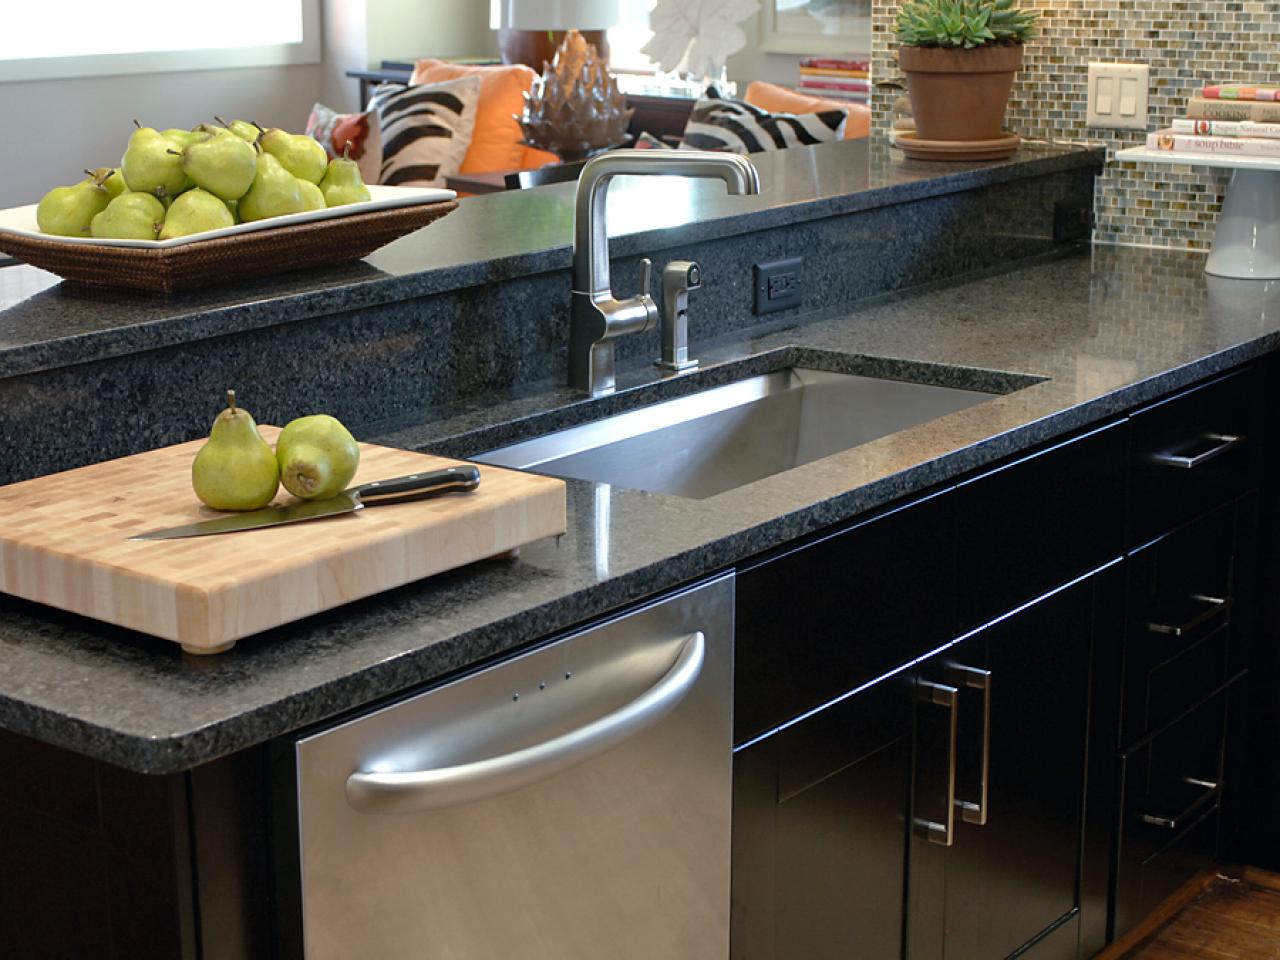 Choosing The Right Kitchen Sink And Faucet Hgtv throughout Best Kitchen Sink Faucet Design